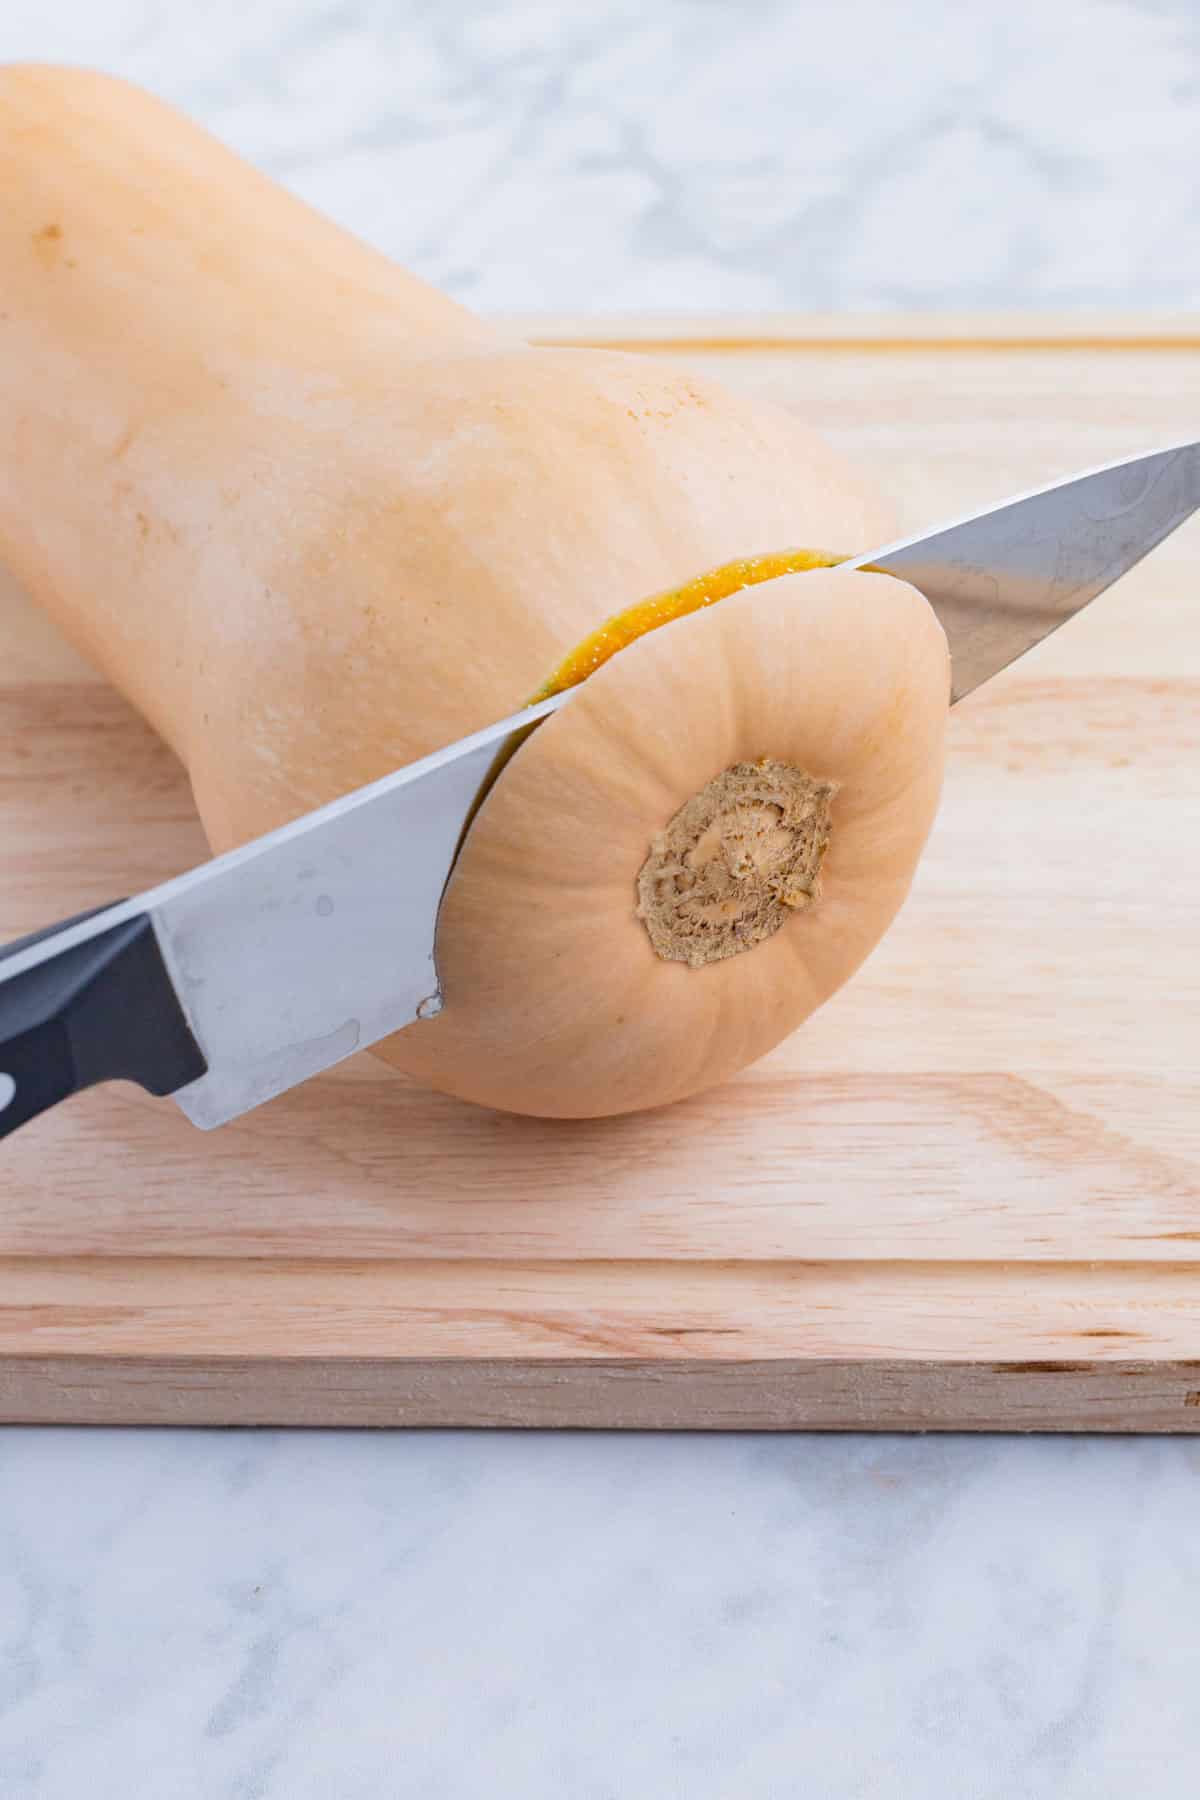 The end is sliced off of a butternut squash.